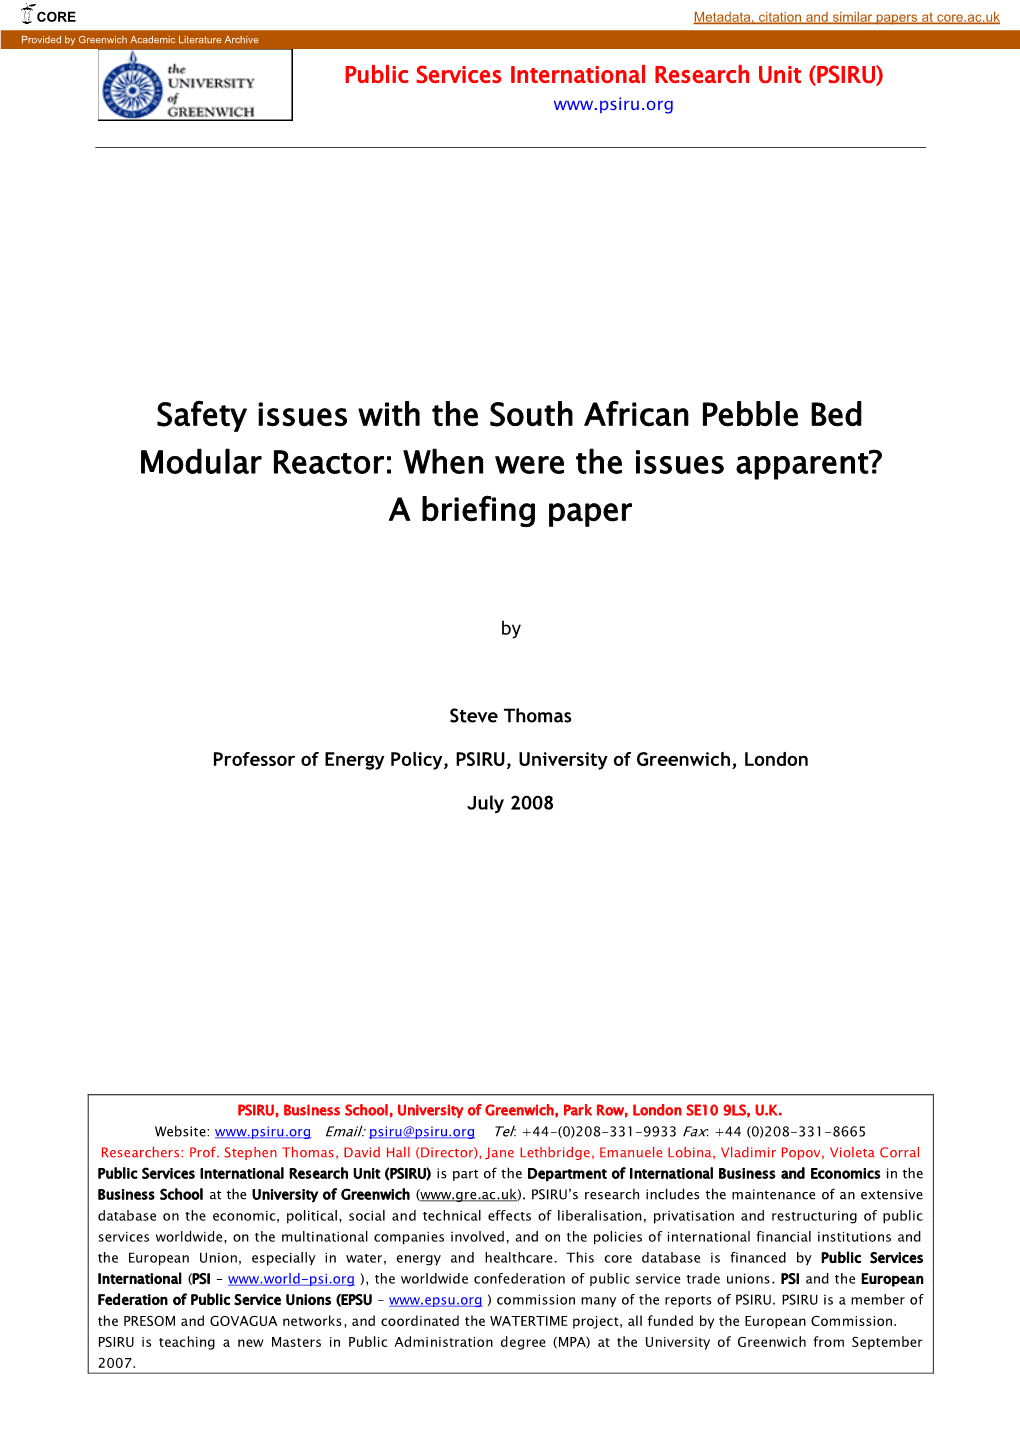 Safety Issues with the South African Pebble Bed Modular Reactor: When Were the Issues Apparent? a Briefing Paper